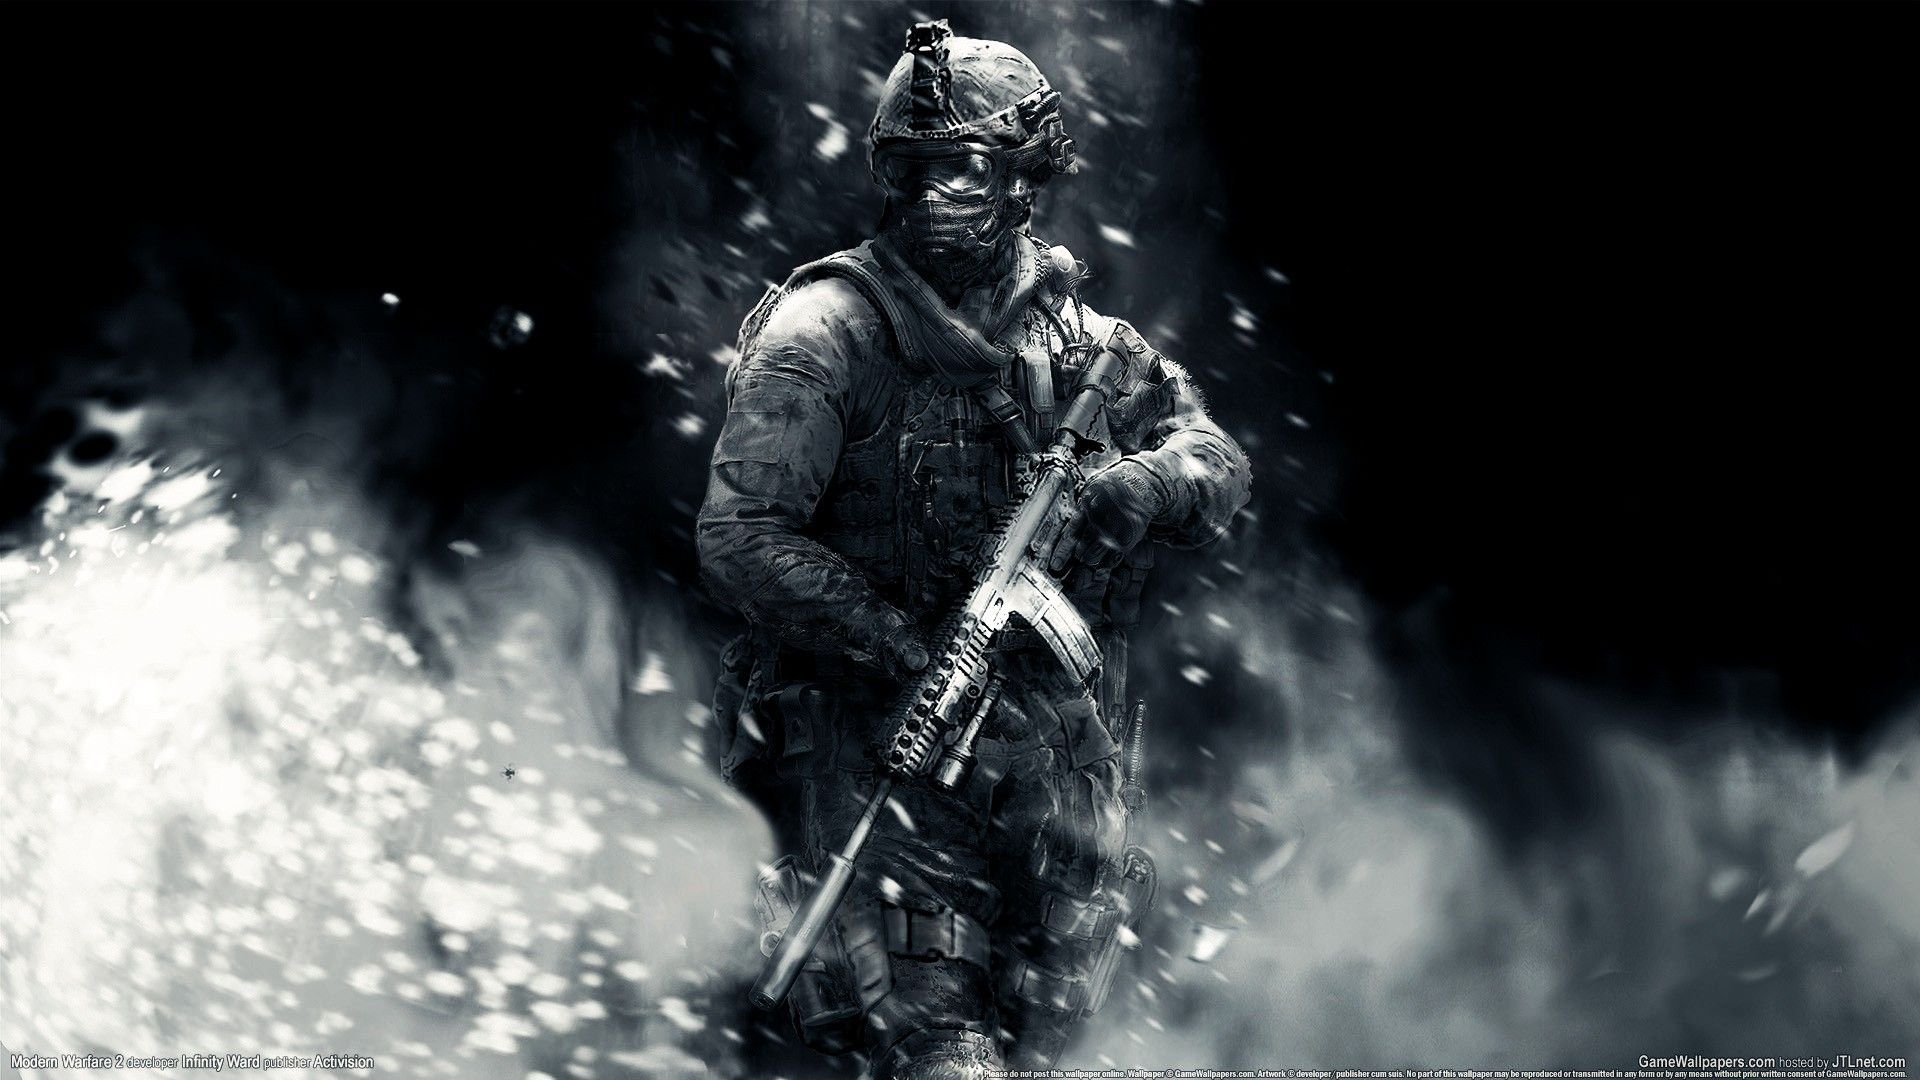 Iphone Call Of Duty Wallpapers